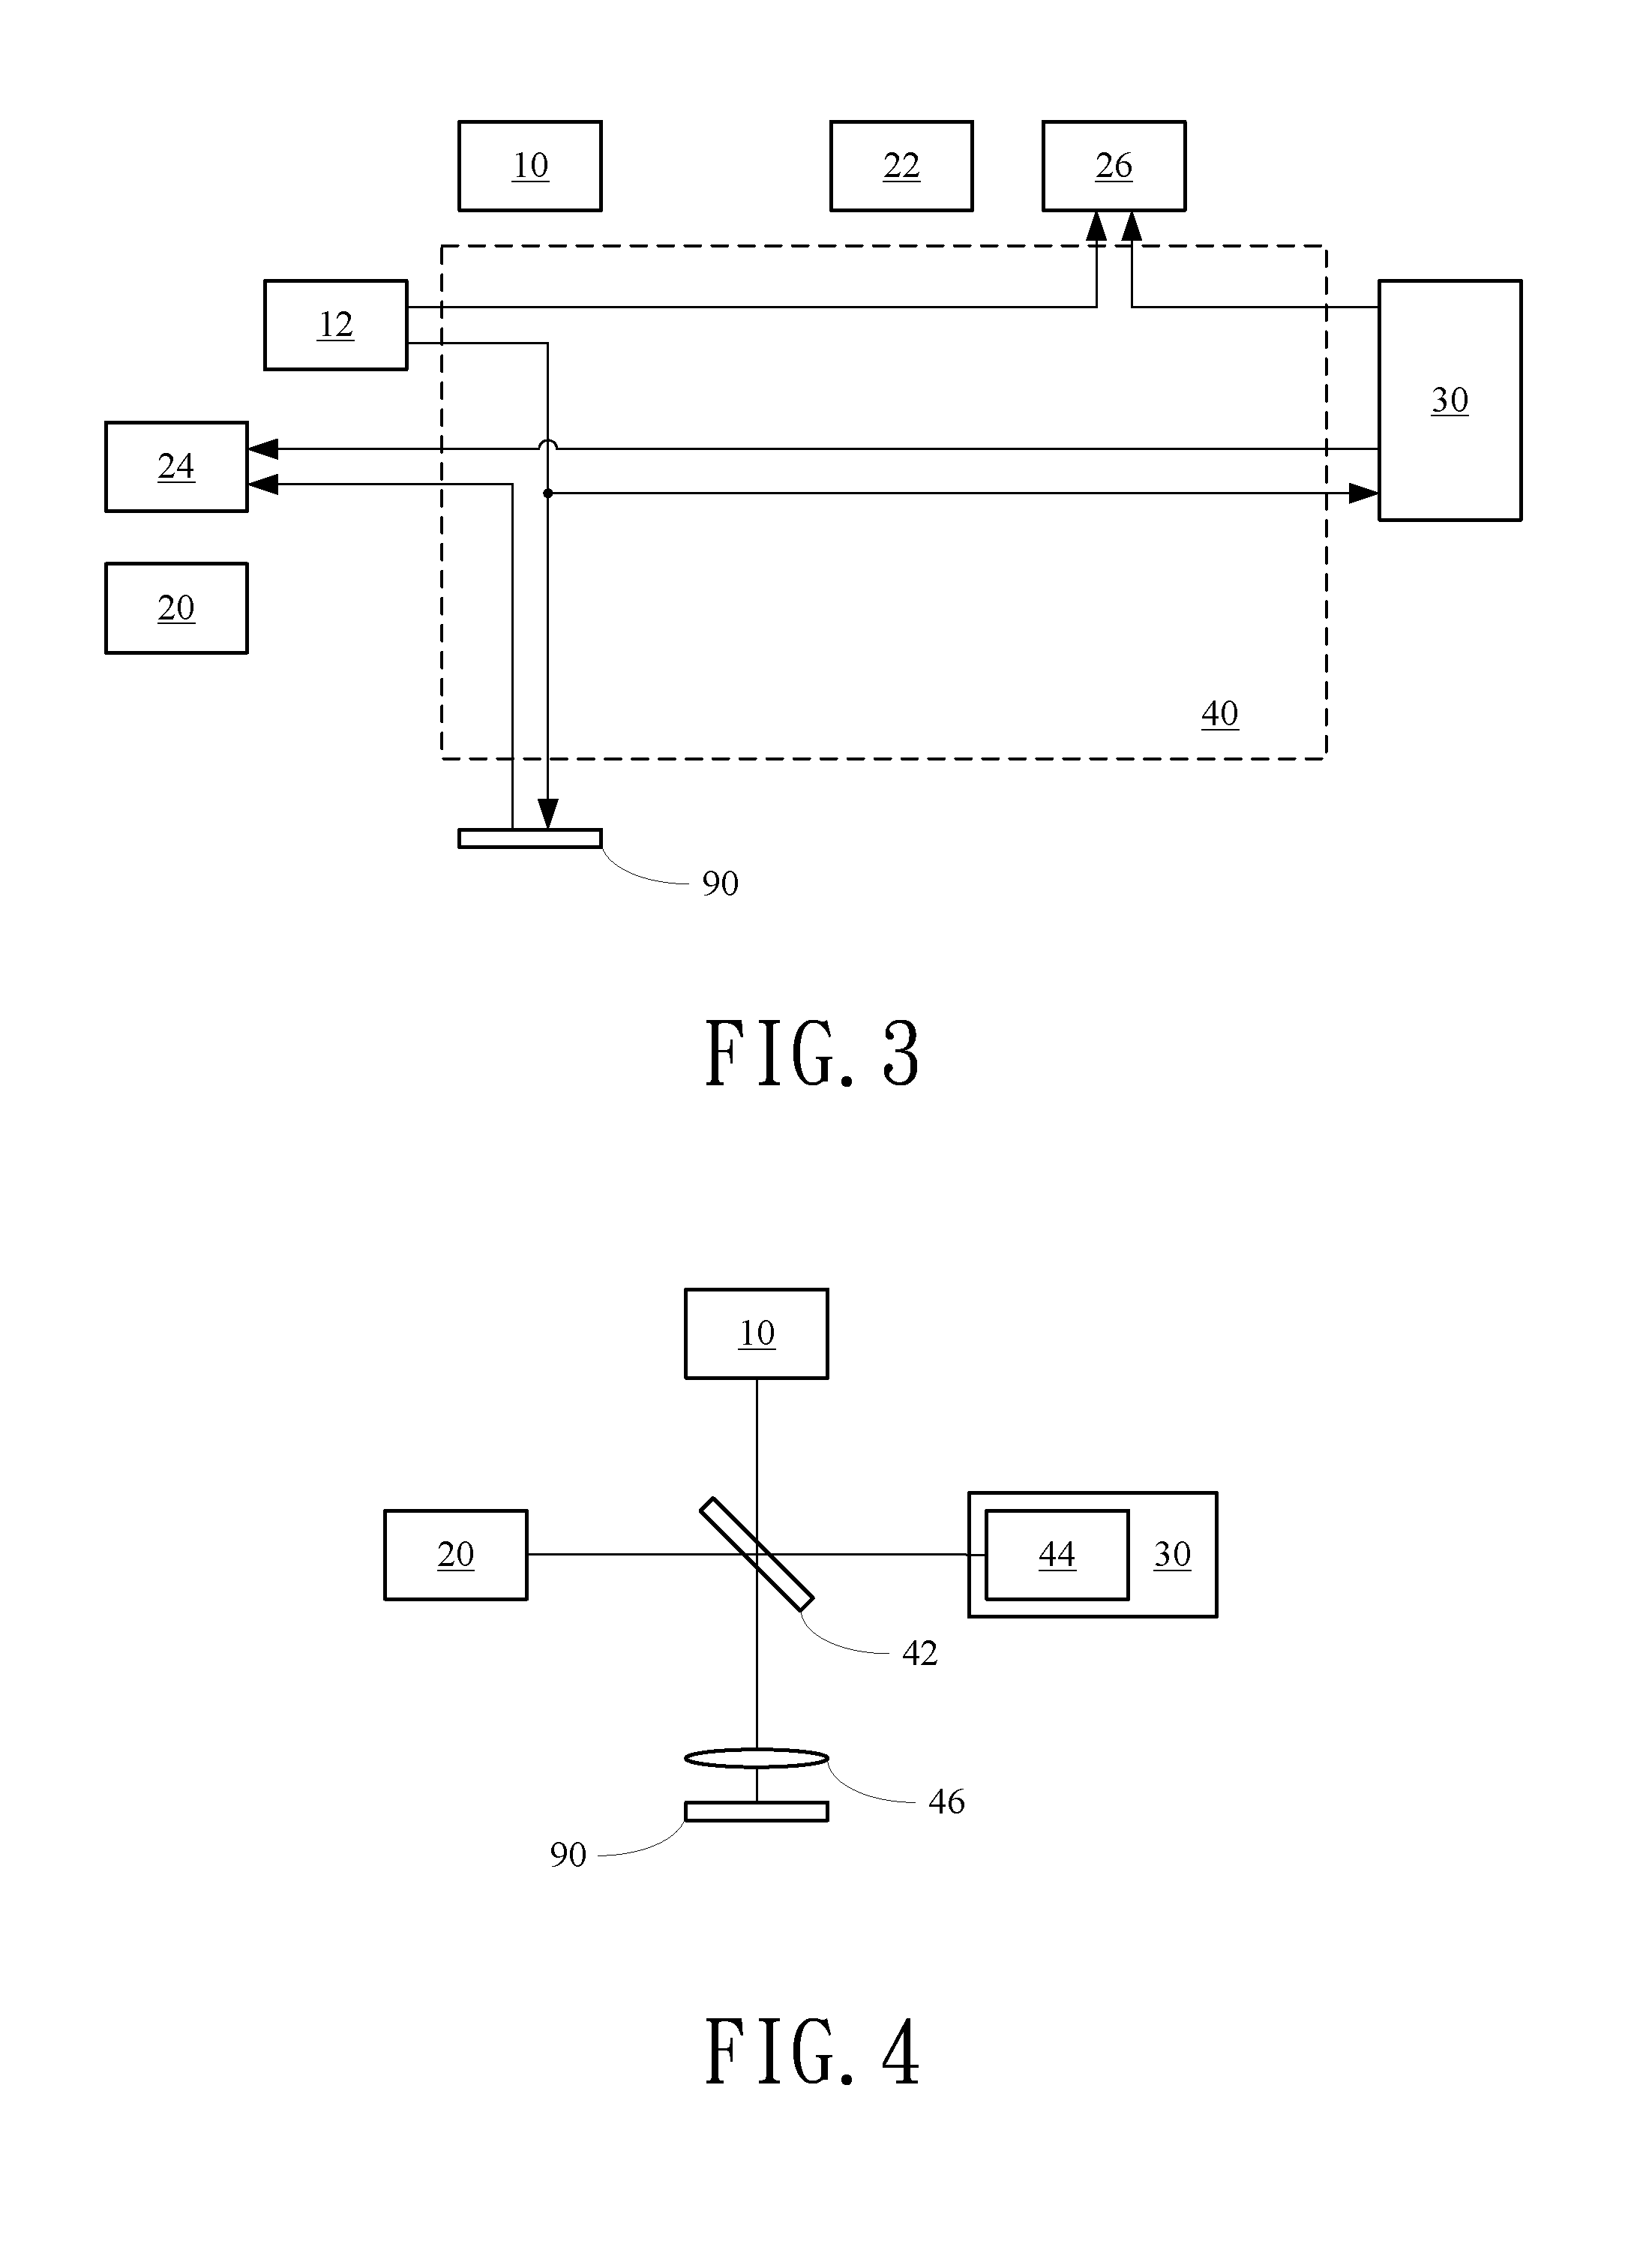 System and Method for Measuring Interferences